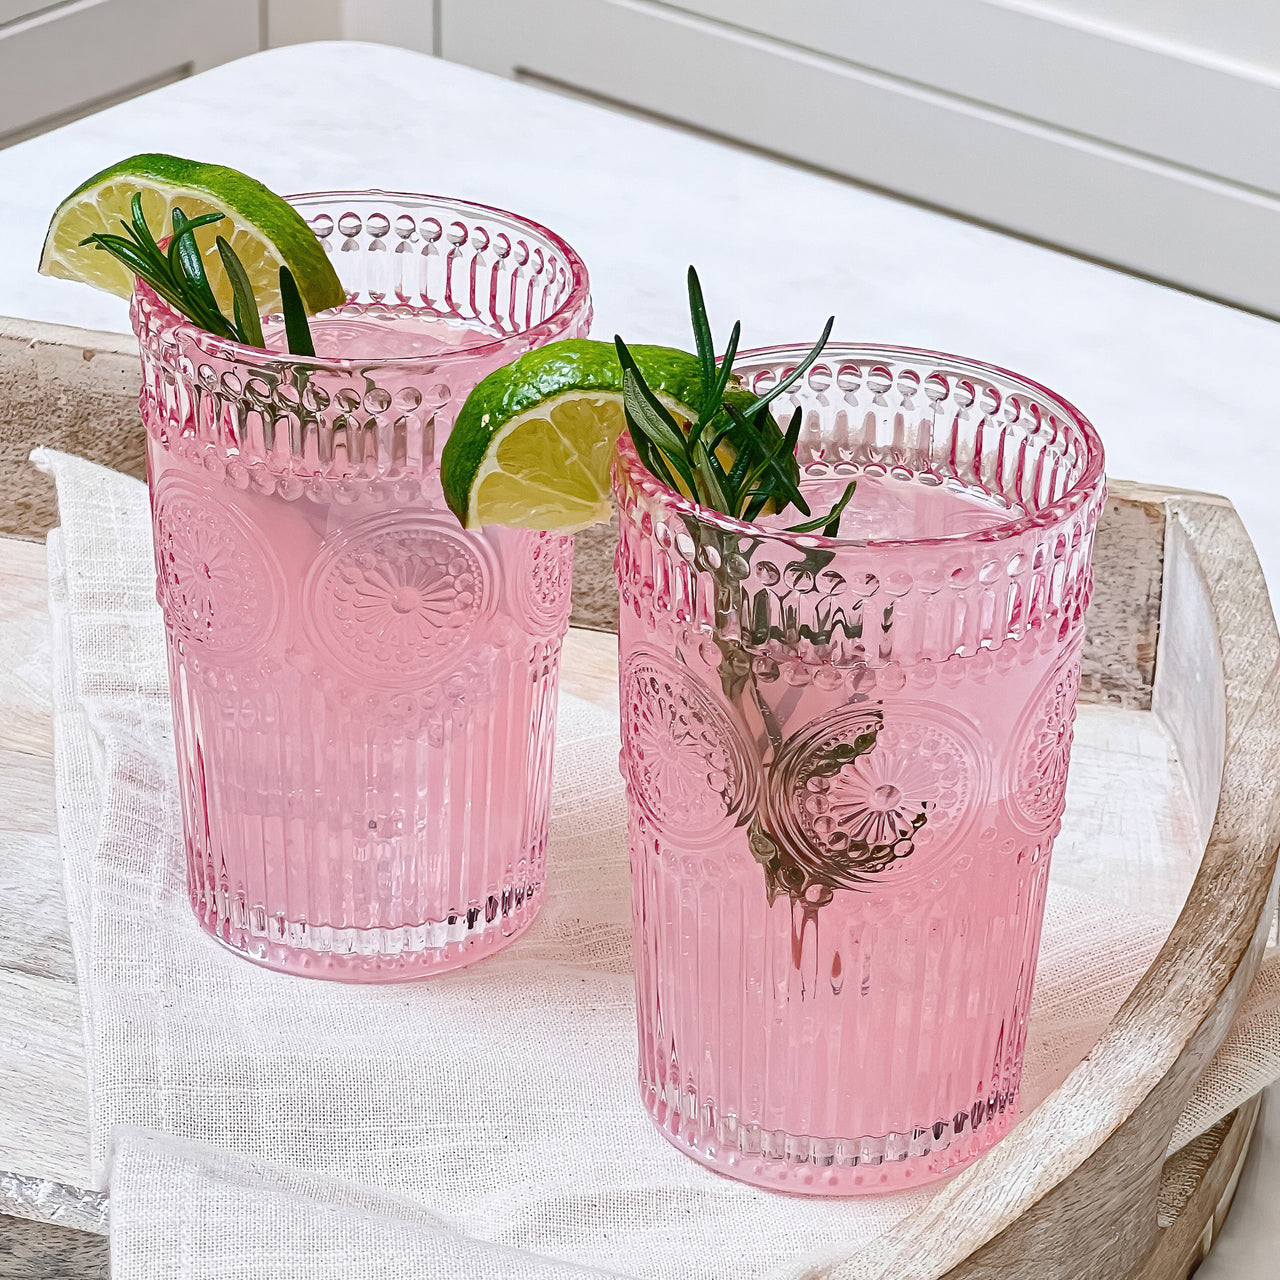 13 oz. Vintage Textured Pink Drinking Glass Cups (Set of 6) - Alternate Image 2 | My Wedding Favors